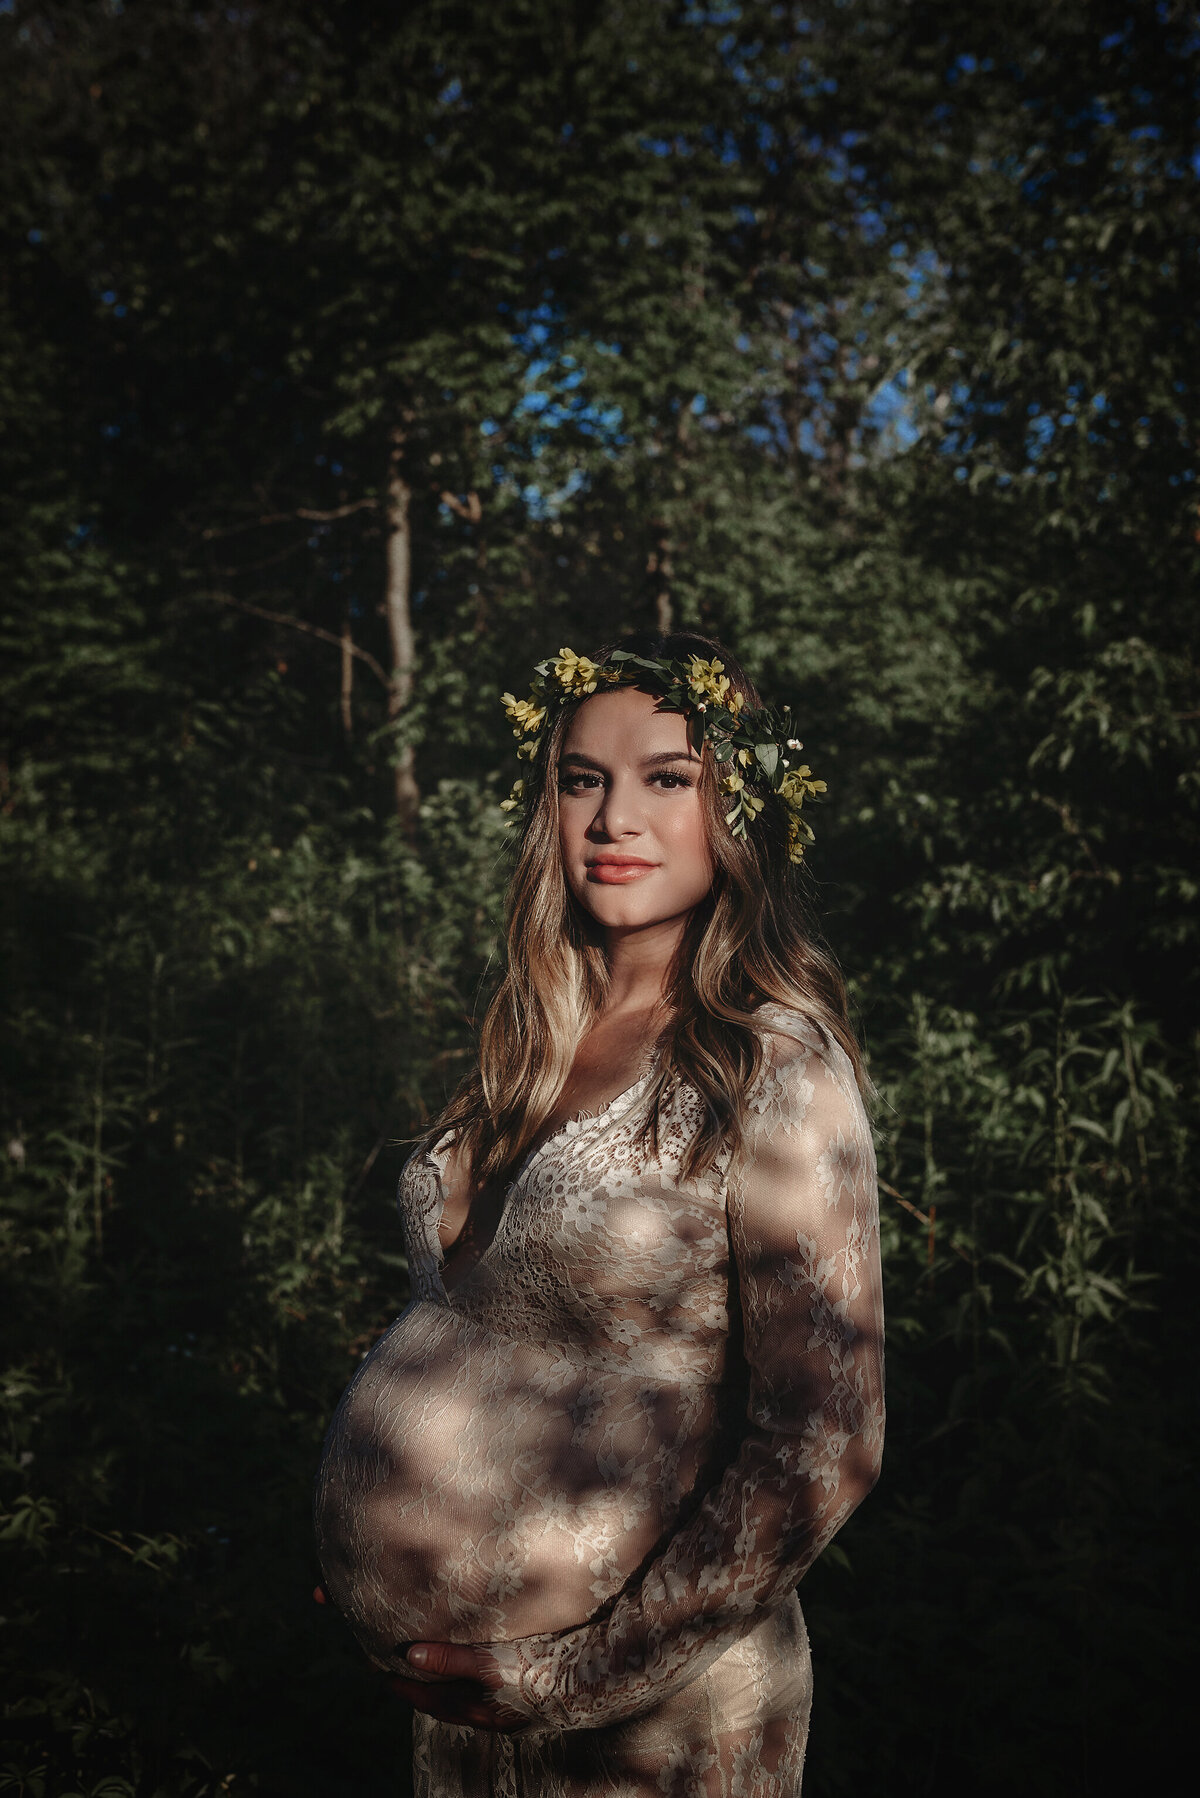 Whispers of maternity dreams echo in the woodland. Shannon Kathleen Photography captures the dreamy essence of your journey. Schedule your session for woodland memories.